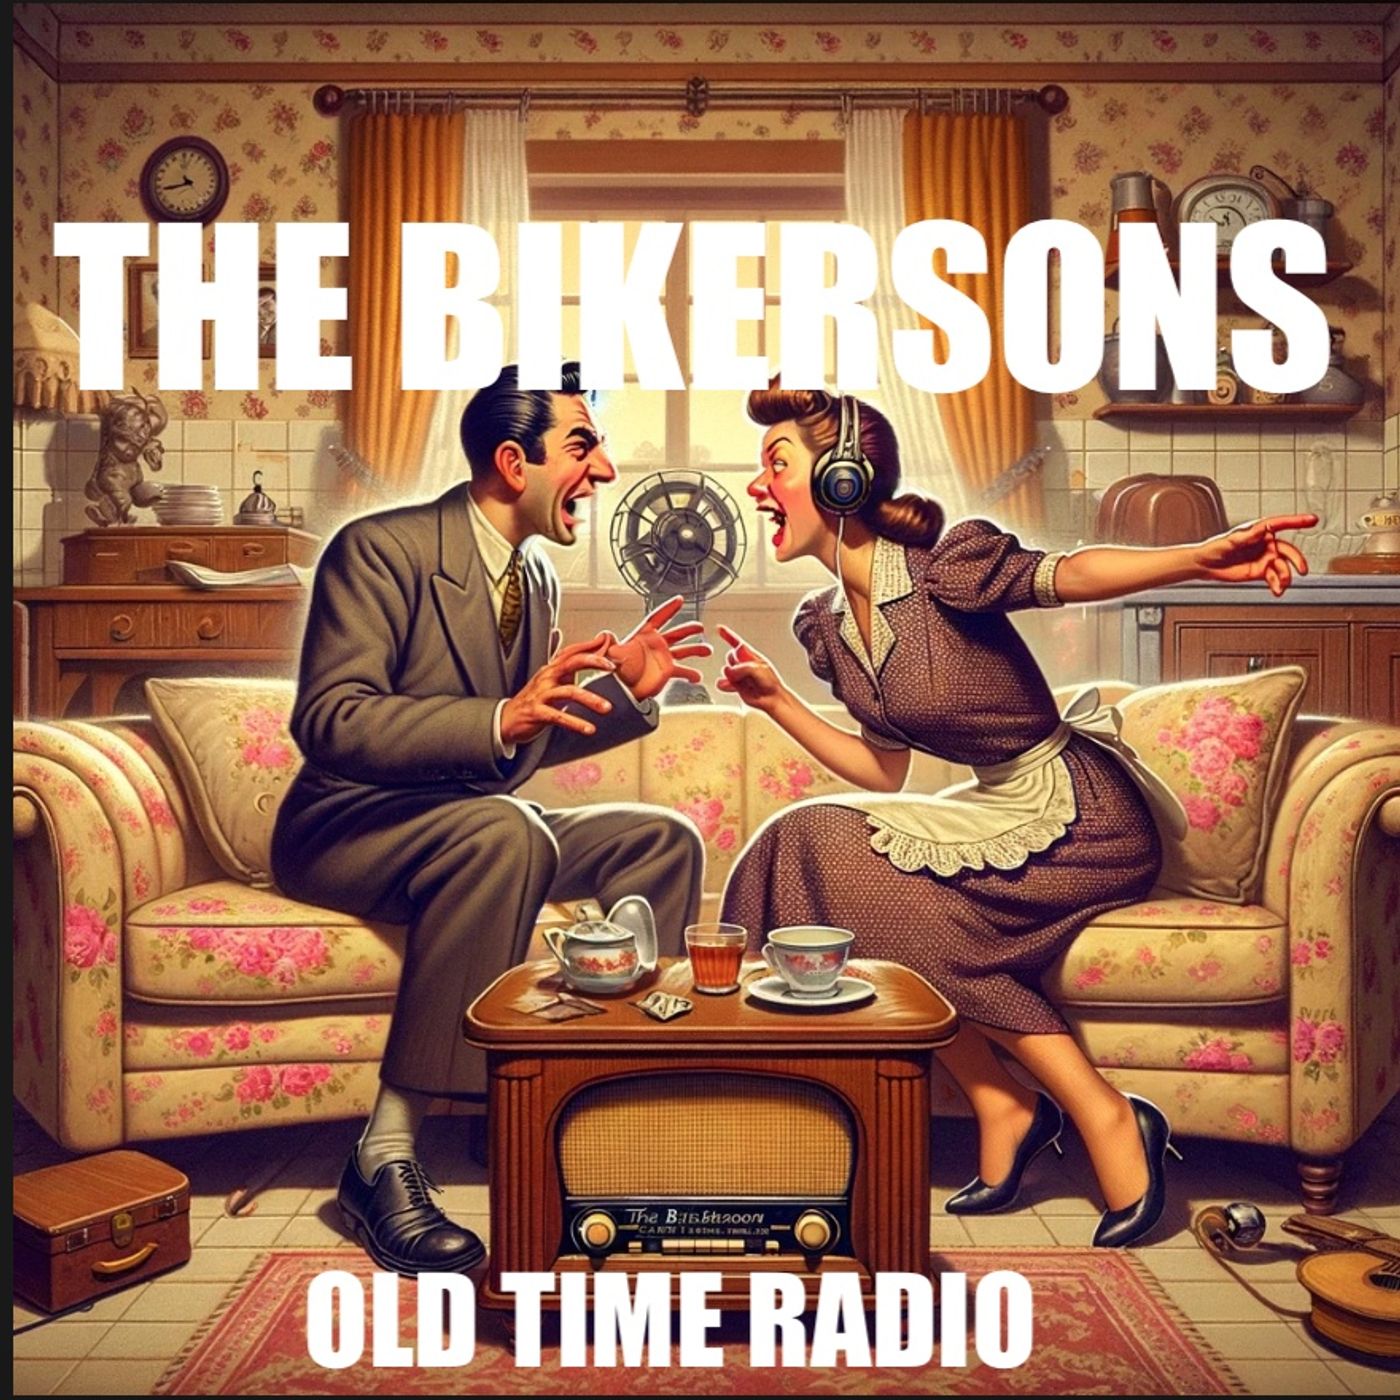 The Bickerson - Old Time Radio